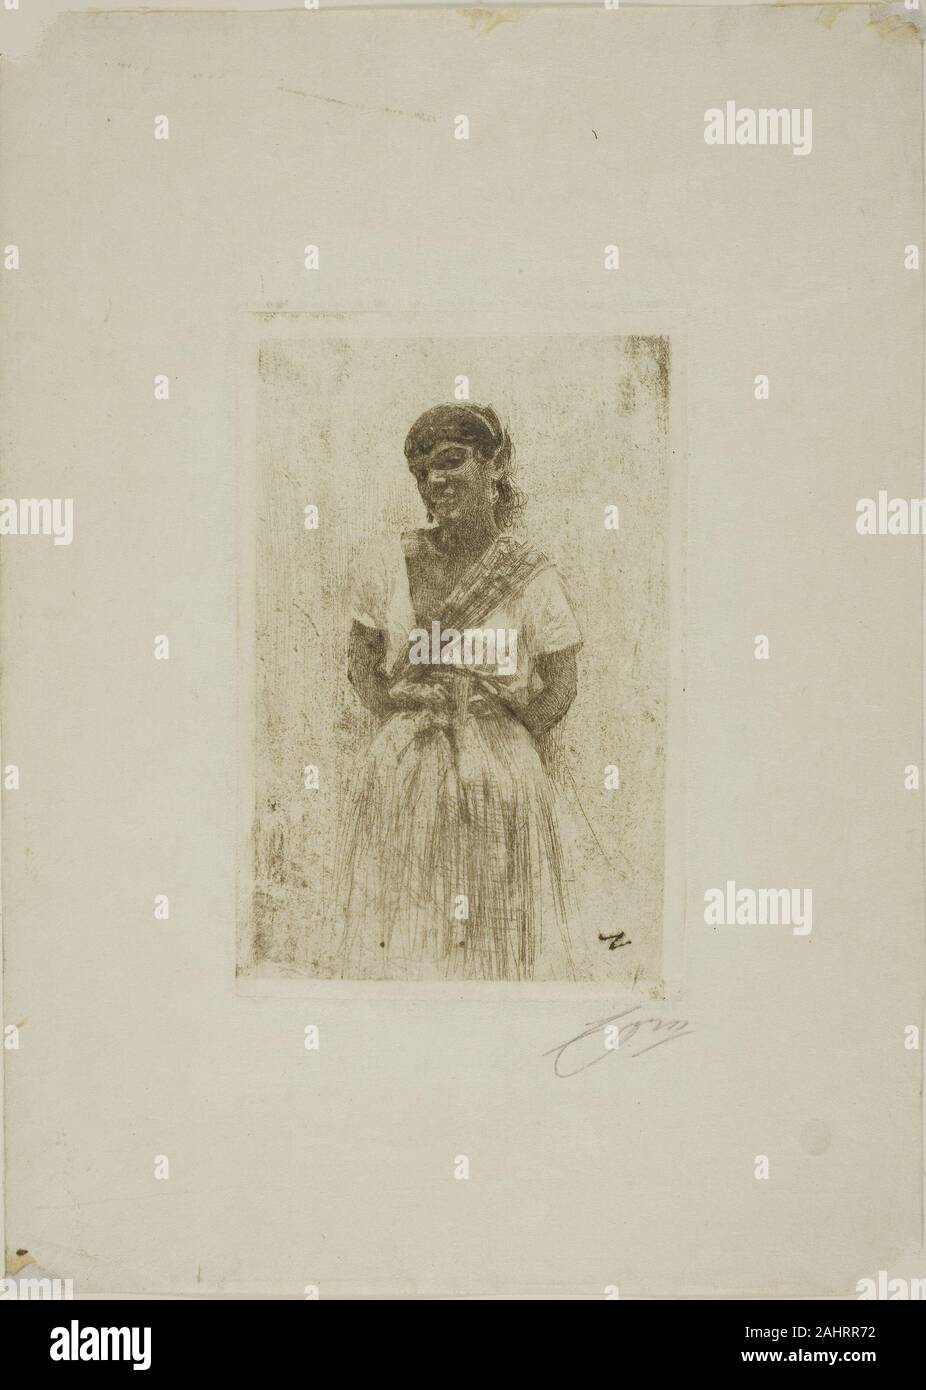 Anders Zorn. Pepita. 1883. Sweden. Etching on ivory wove paper Stock Photo